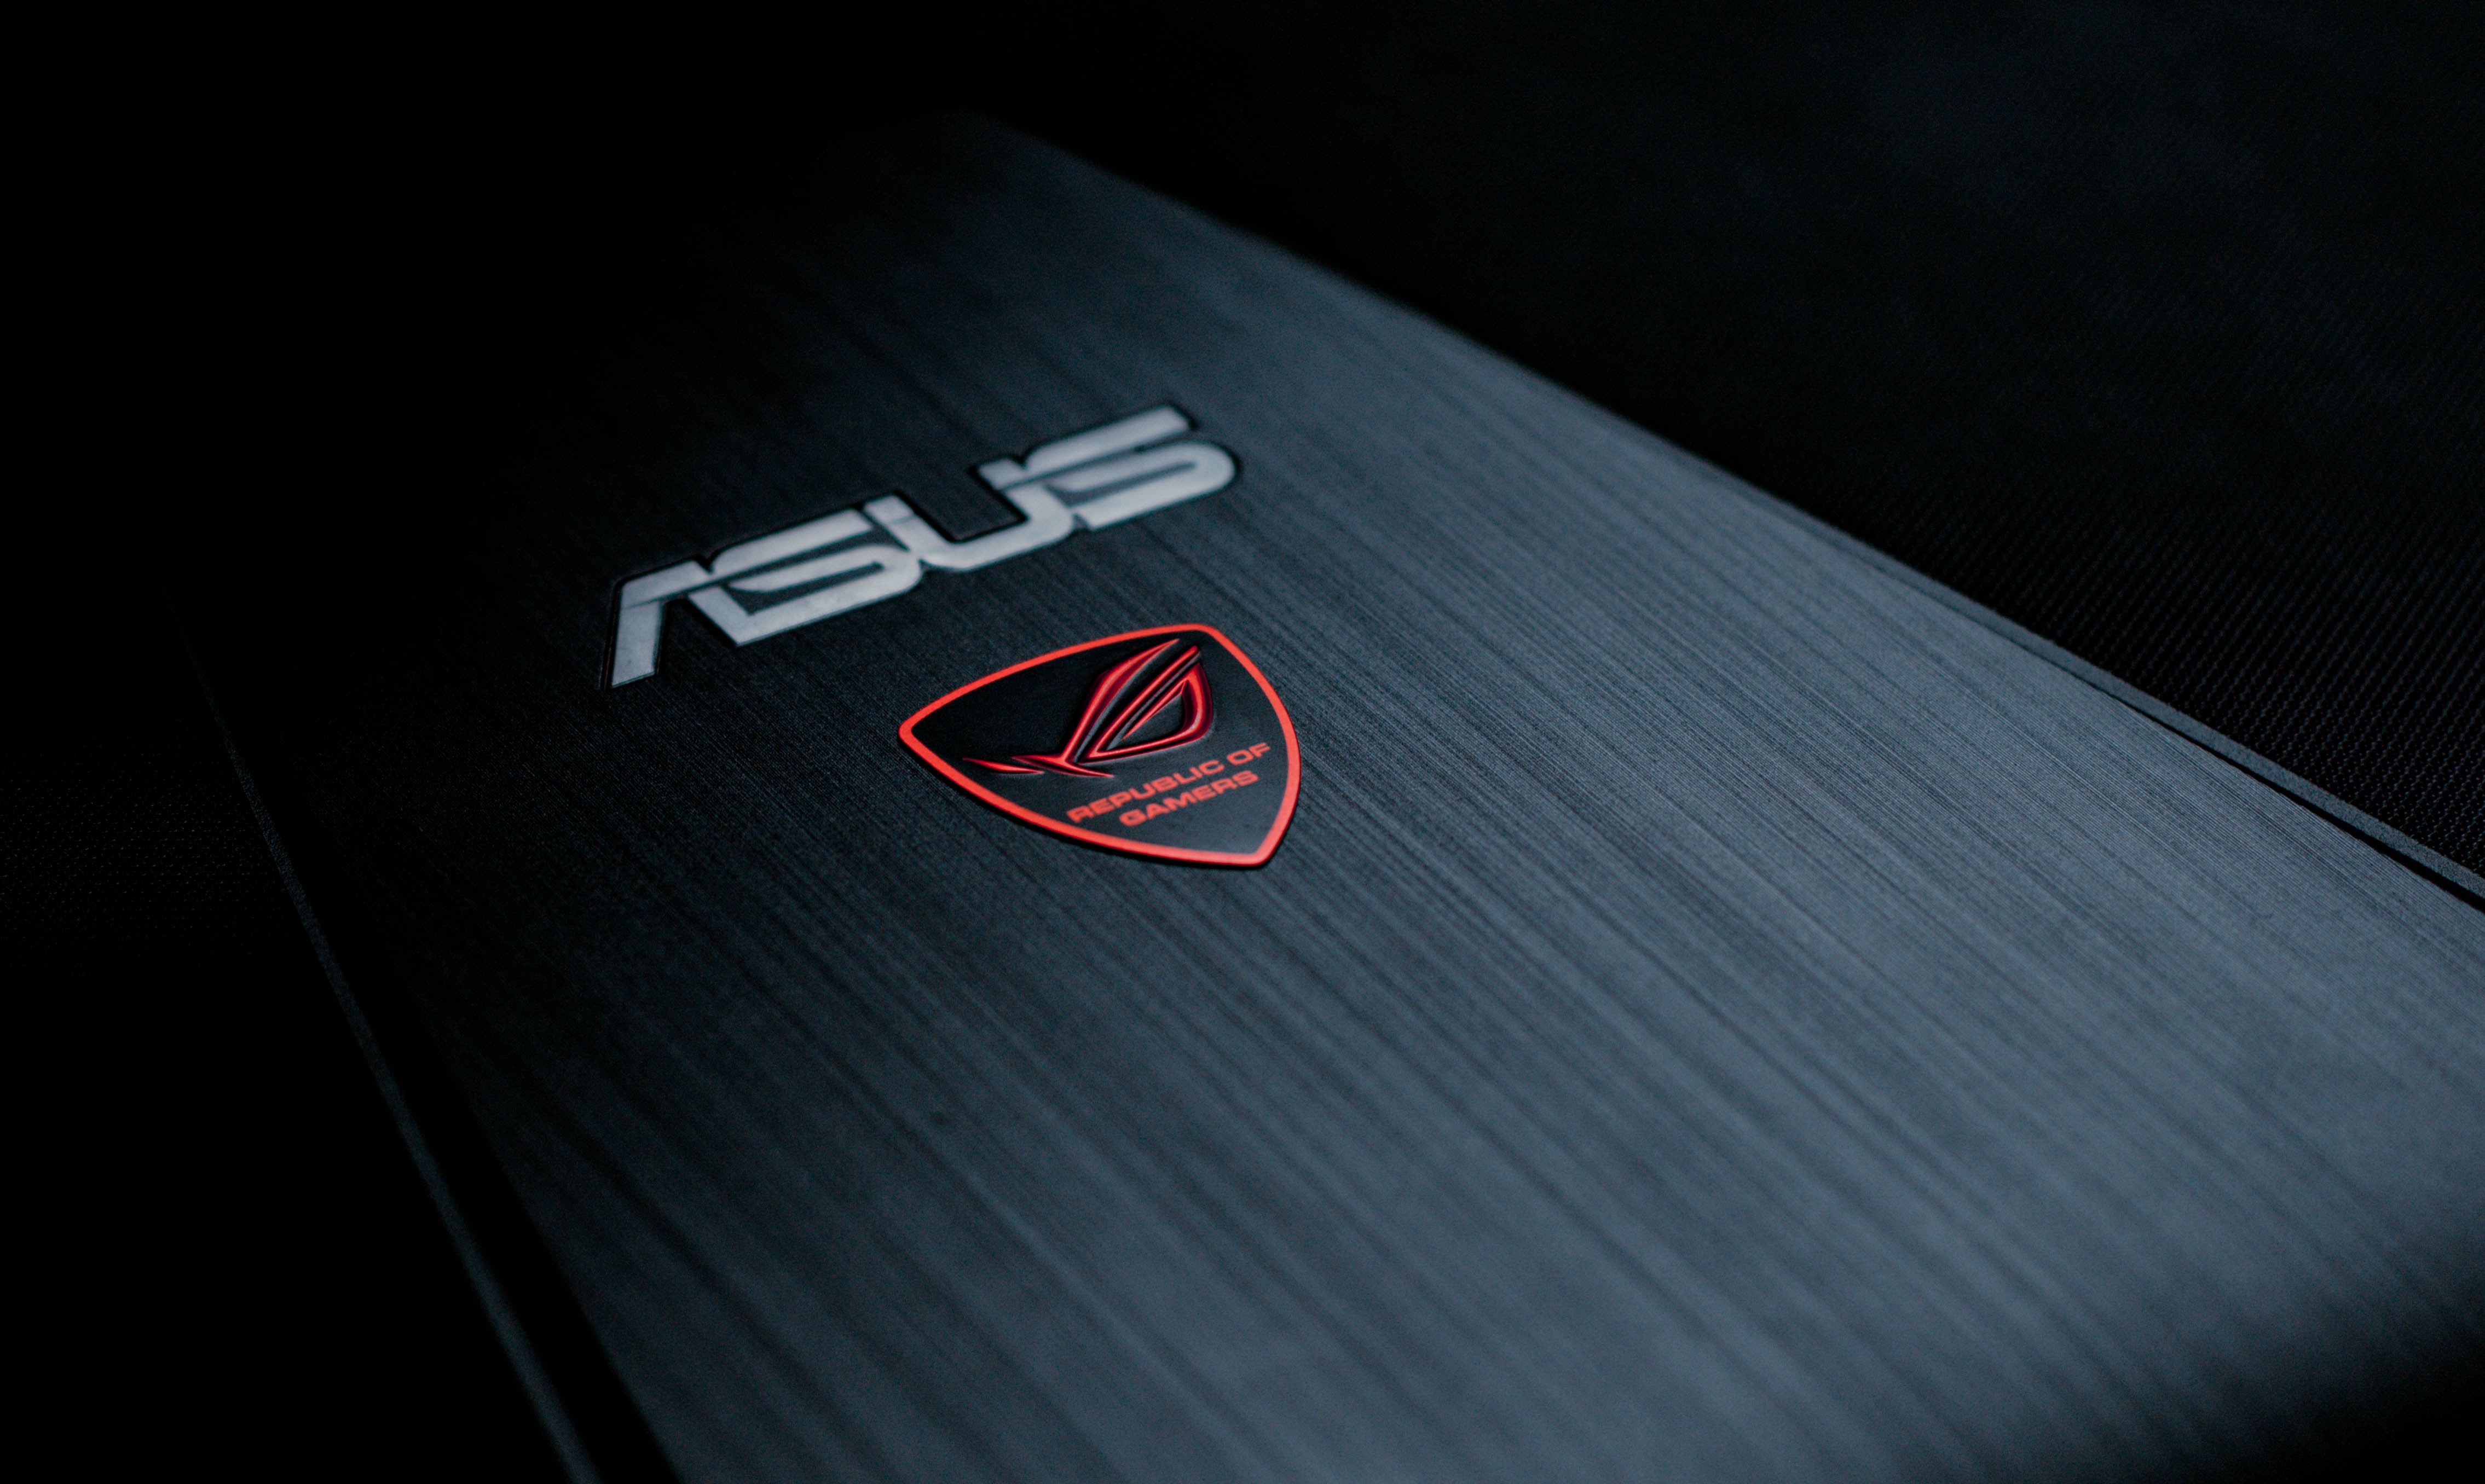 Asus Republic Of Gamers Hd Wallpaper - A1 Wallpaperz For You